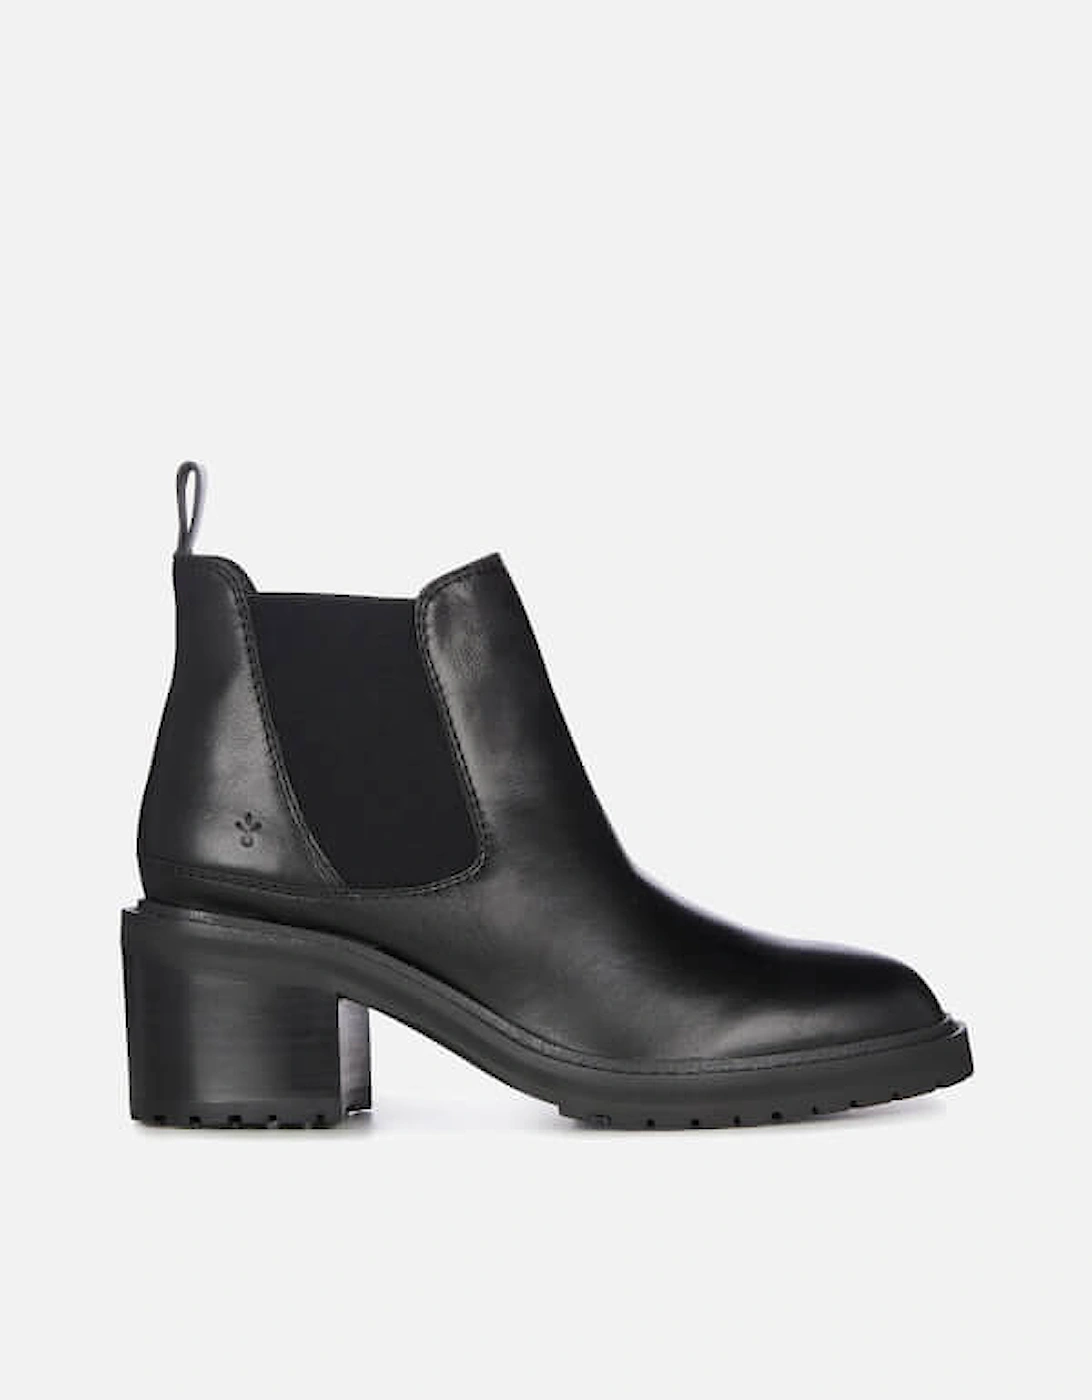 Australia Clare Leather Heeled Chelsea Boots - Australia - Home - Women's Shoes - Women's Boots - Women's Chelsea Boots - Australia Clare Leather Heeled Chelsea Boots, 3 of 2